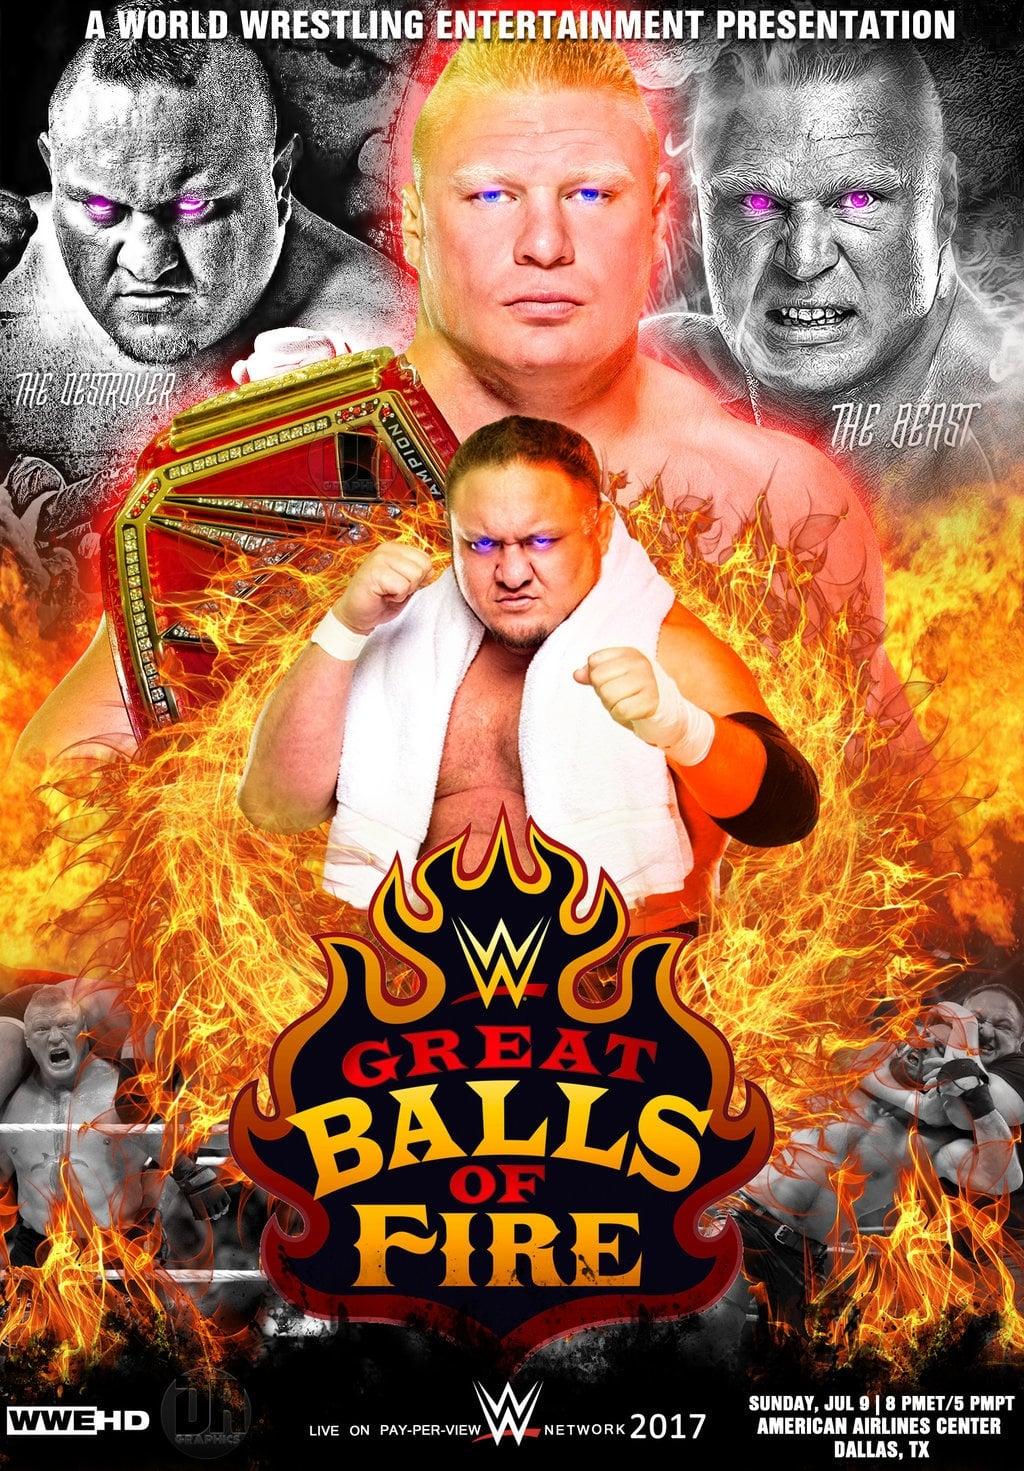 WWE Great Balls of Fire poster